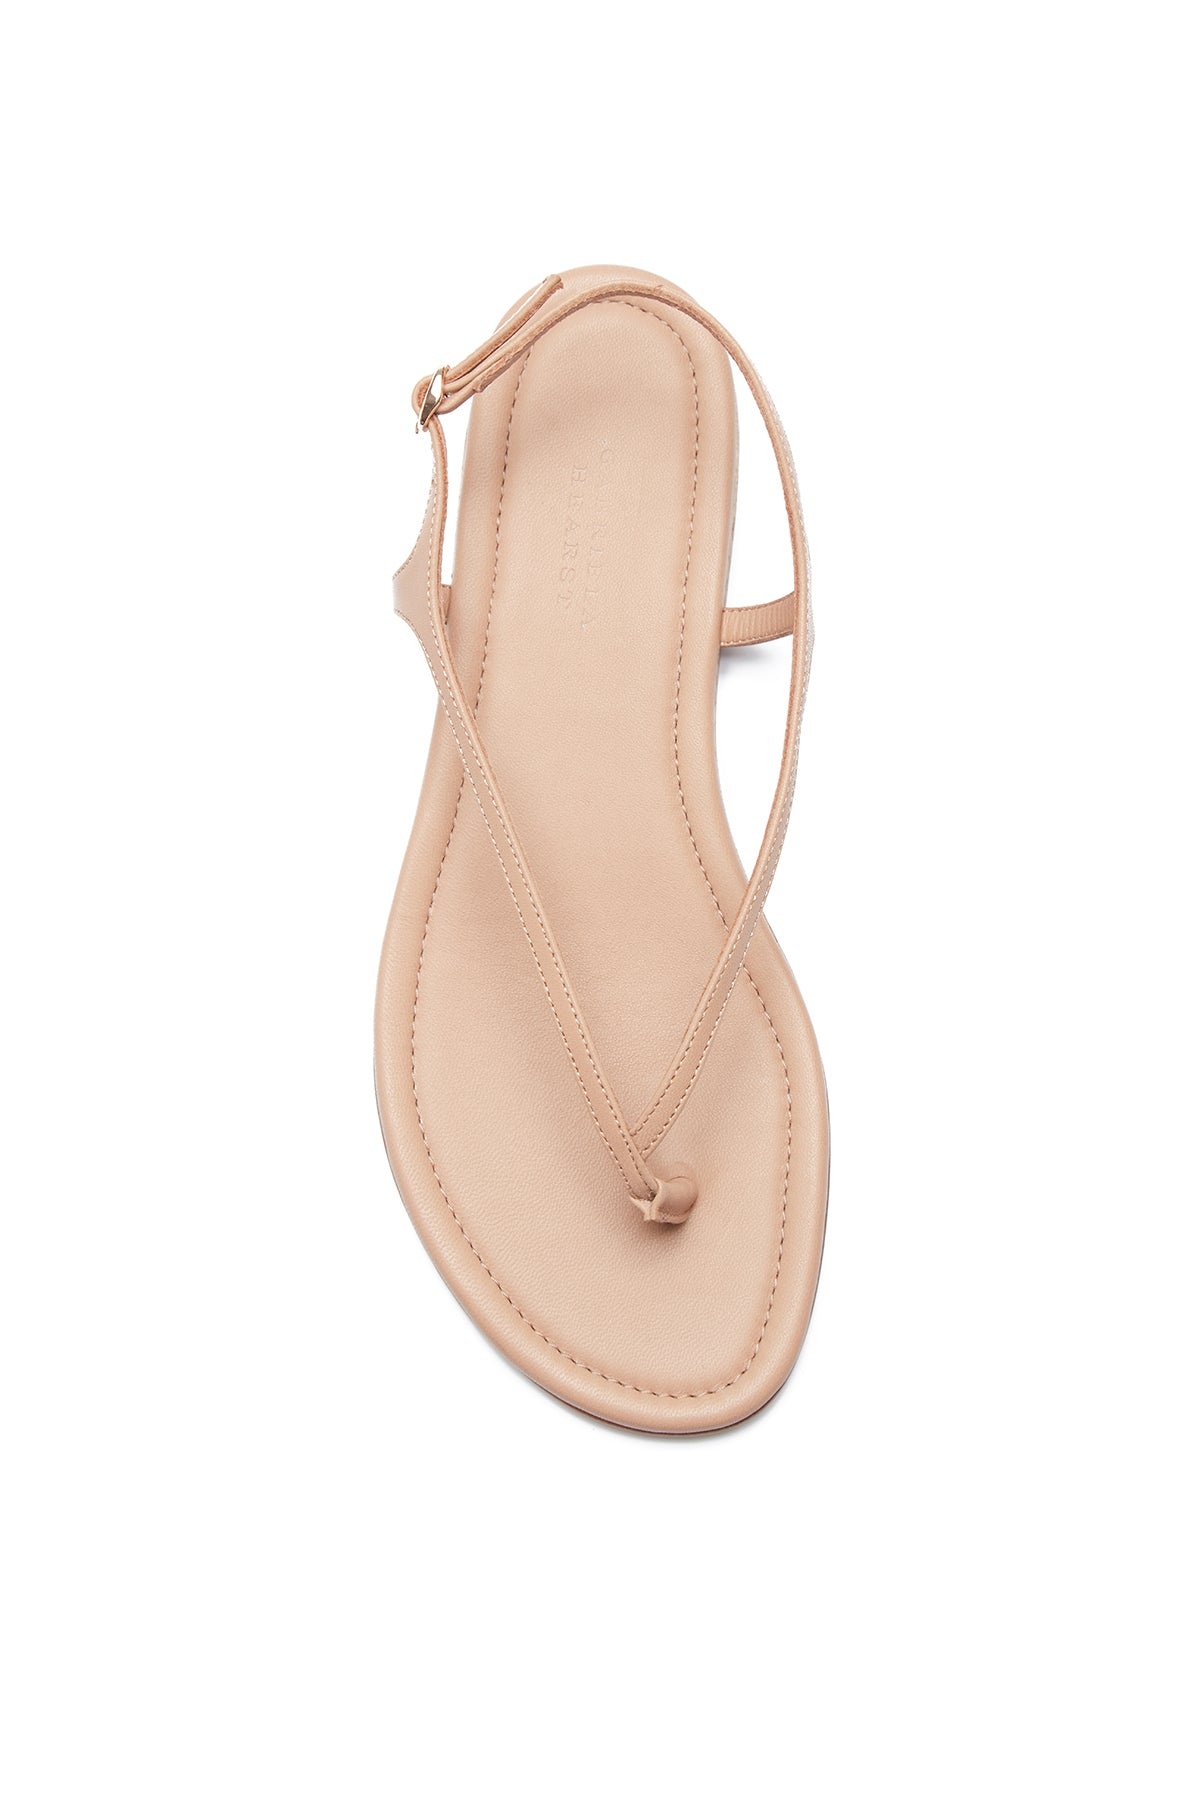 Gia Sandals in Dark Camel Leather - 4